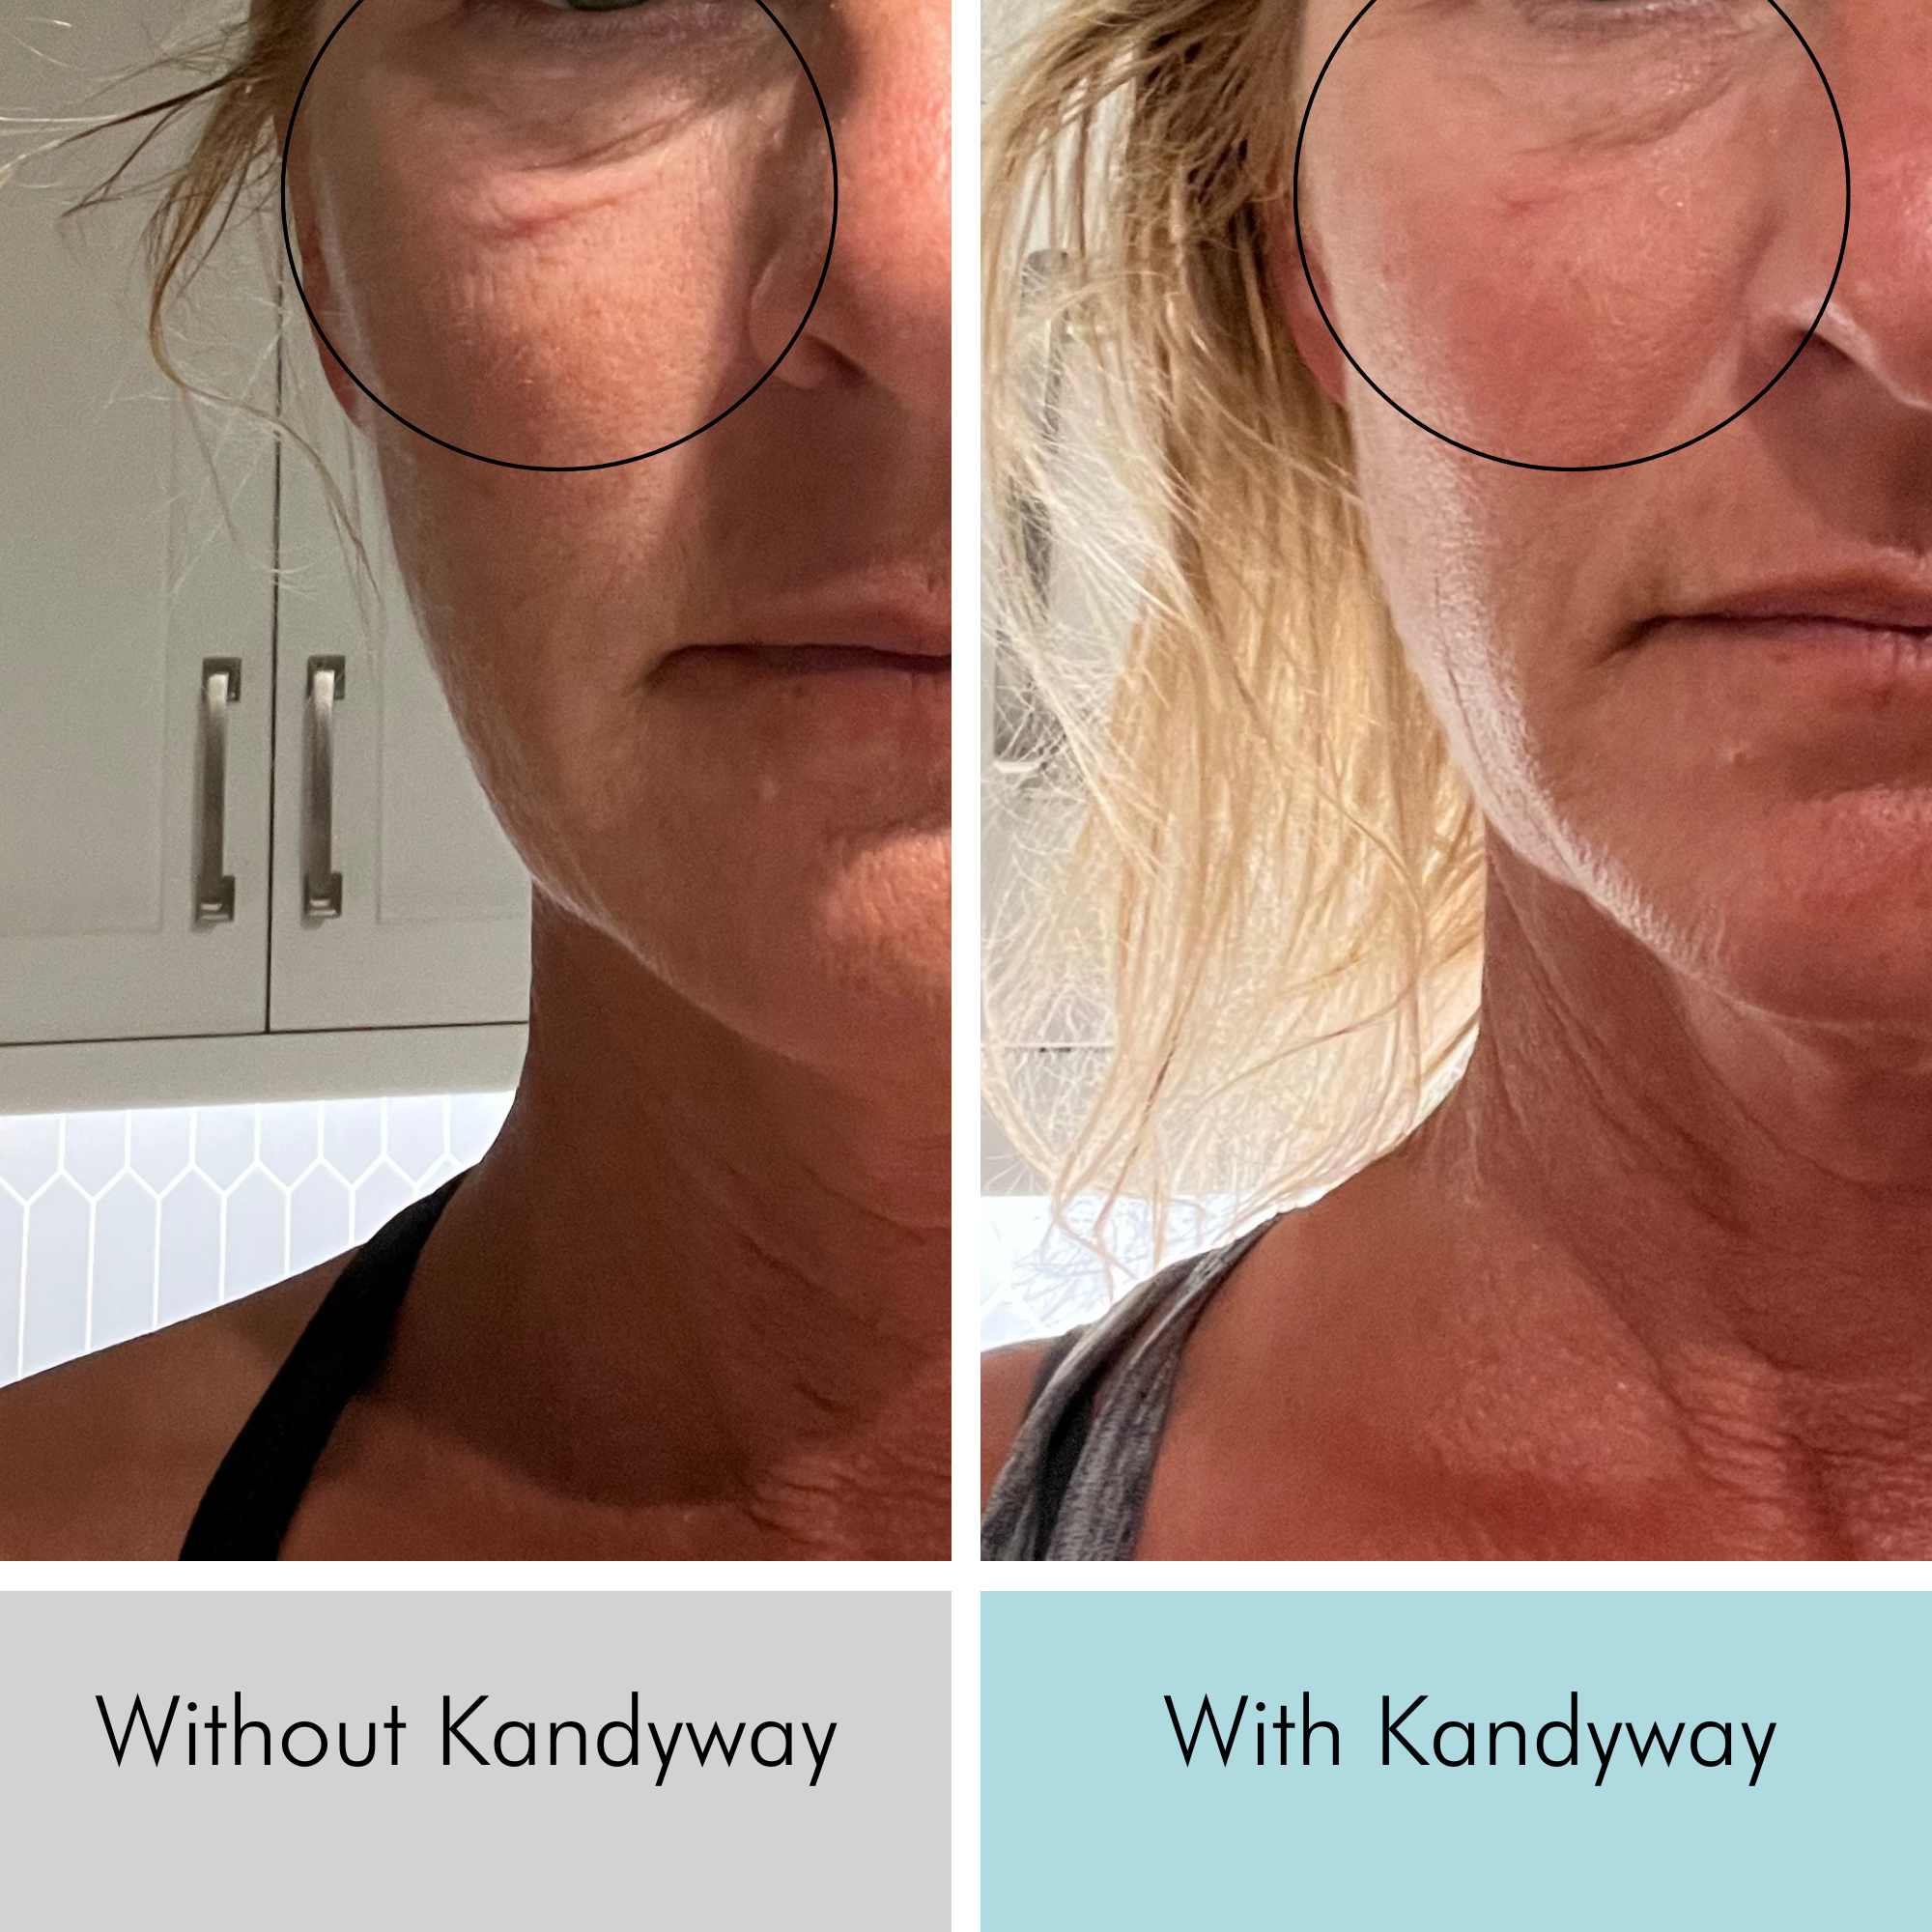 50 year old women showing wrinkle reduction under eyes